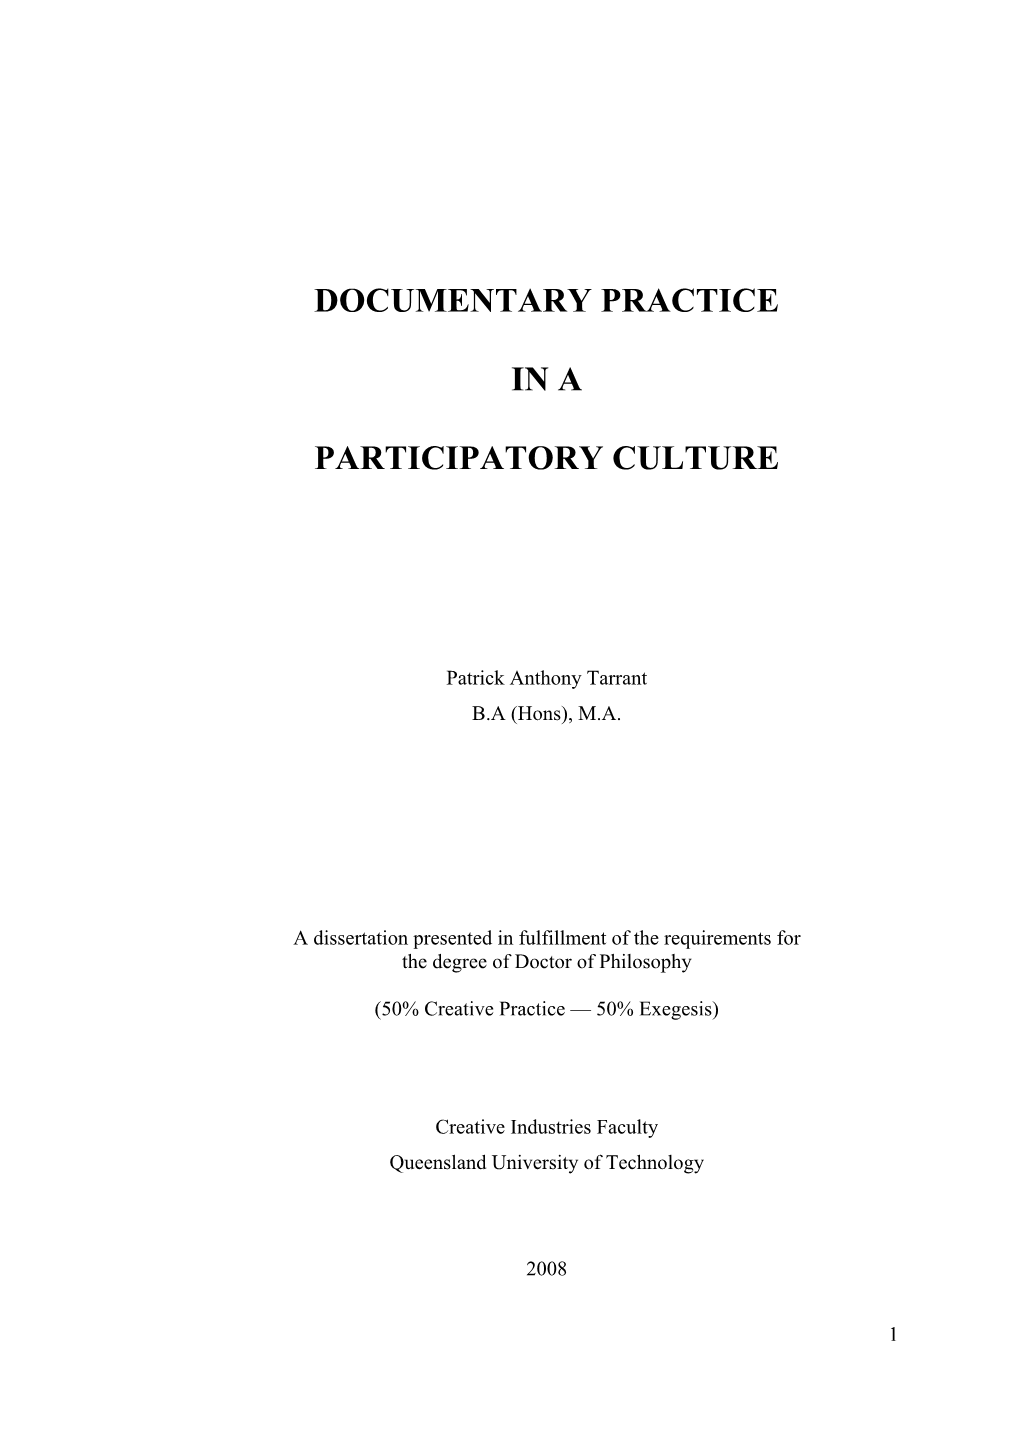 Documentary Practice in a Participatory Culture